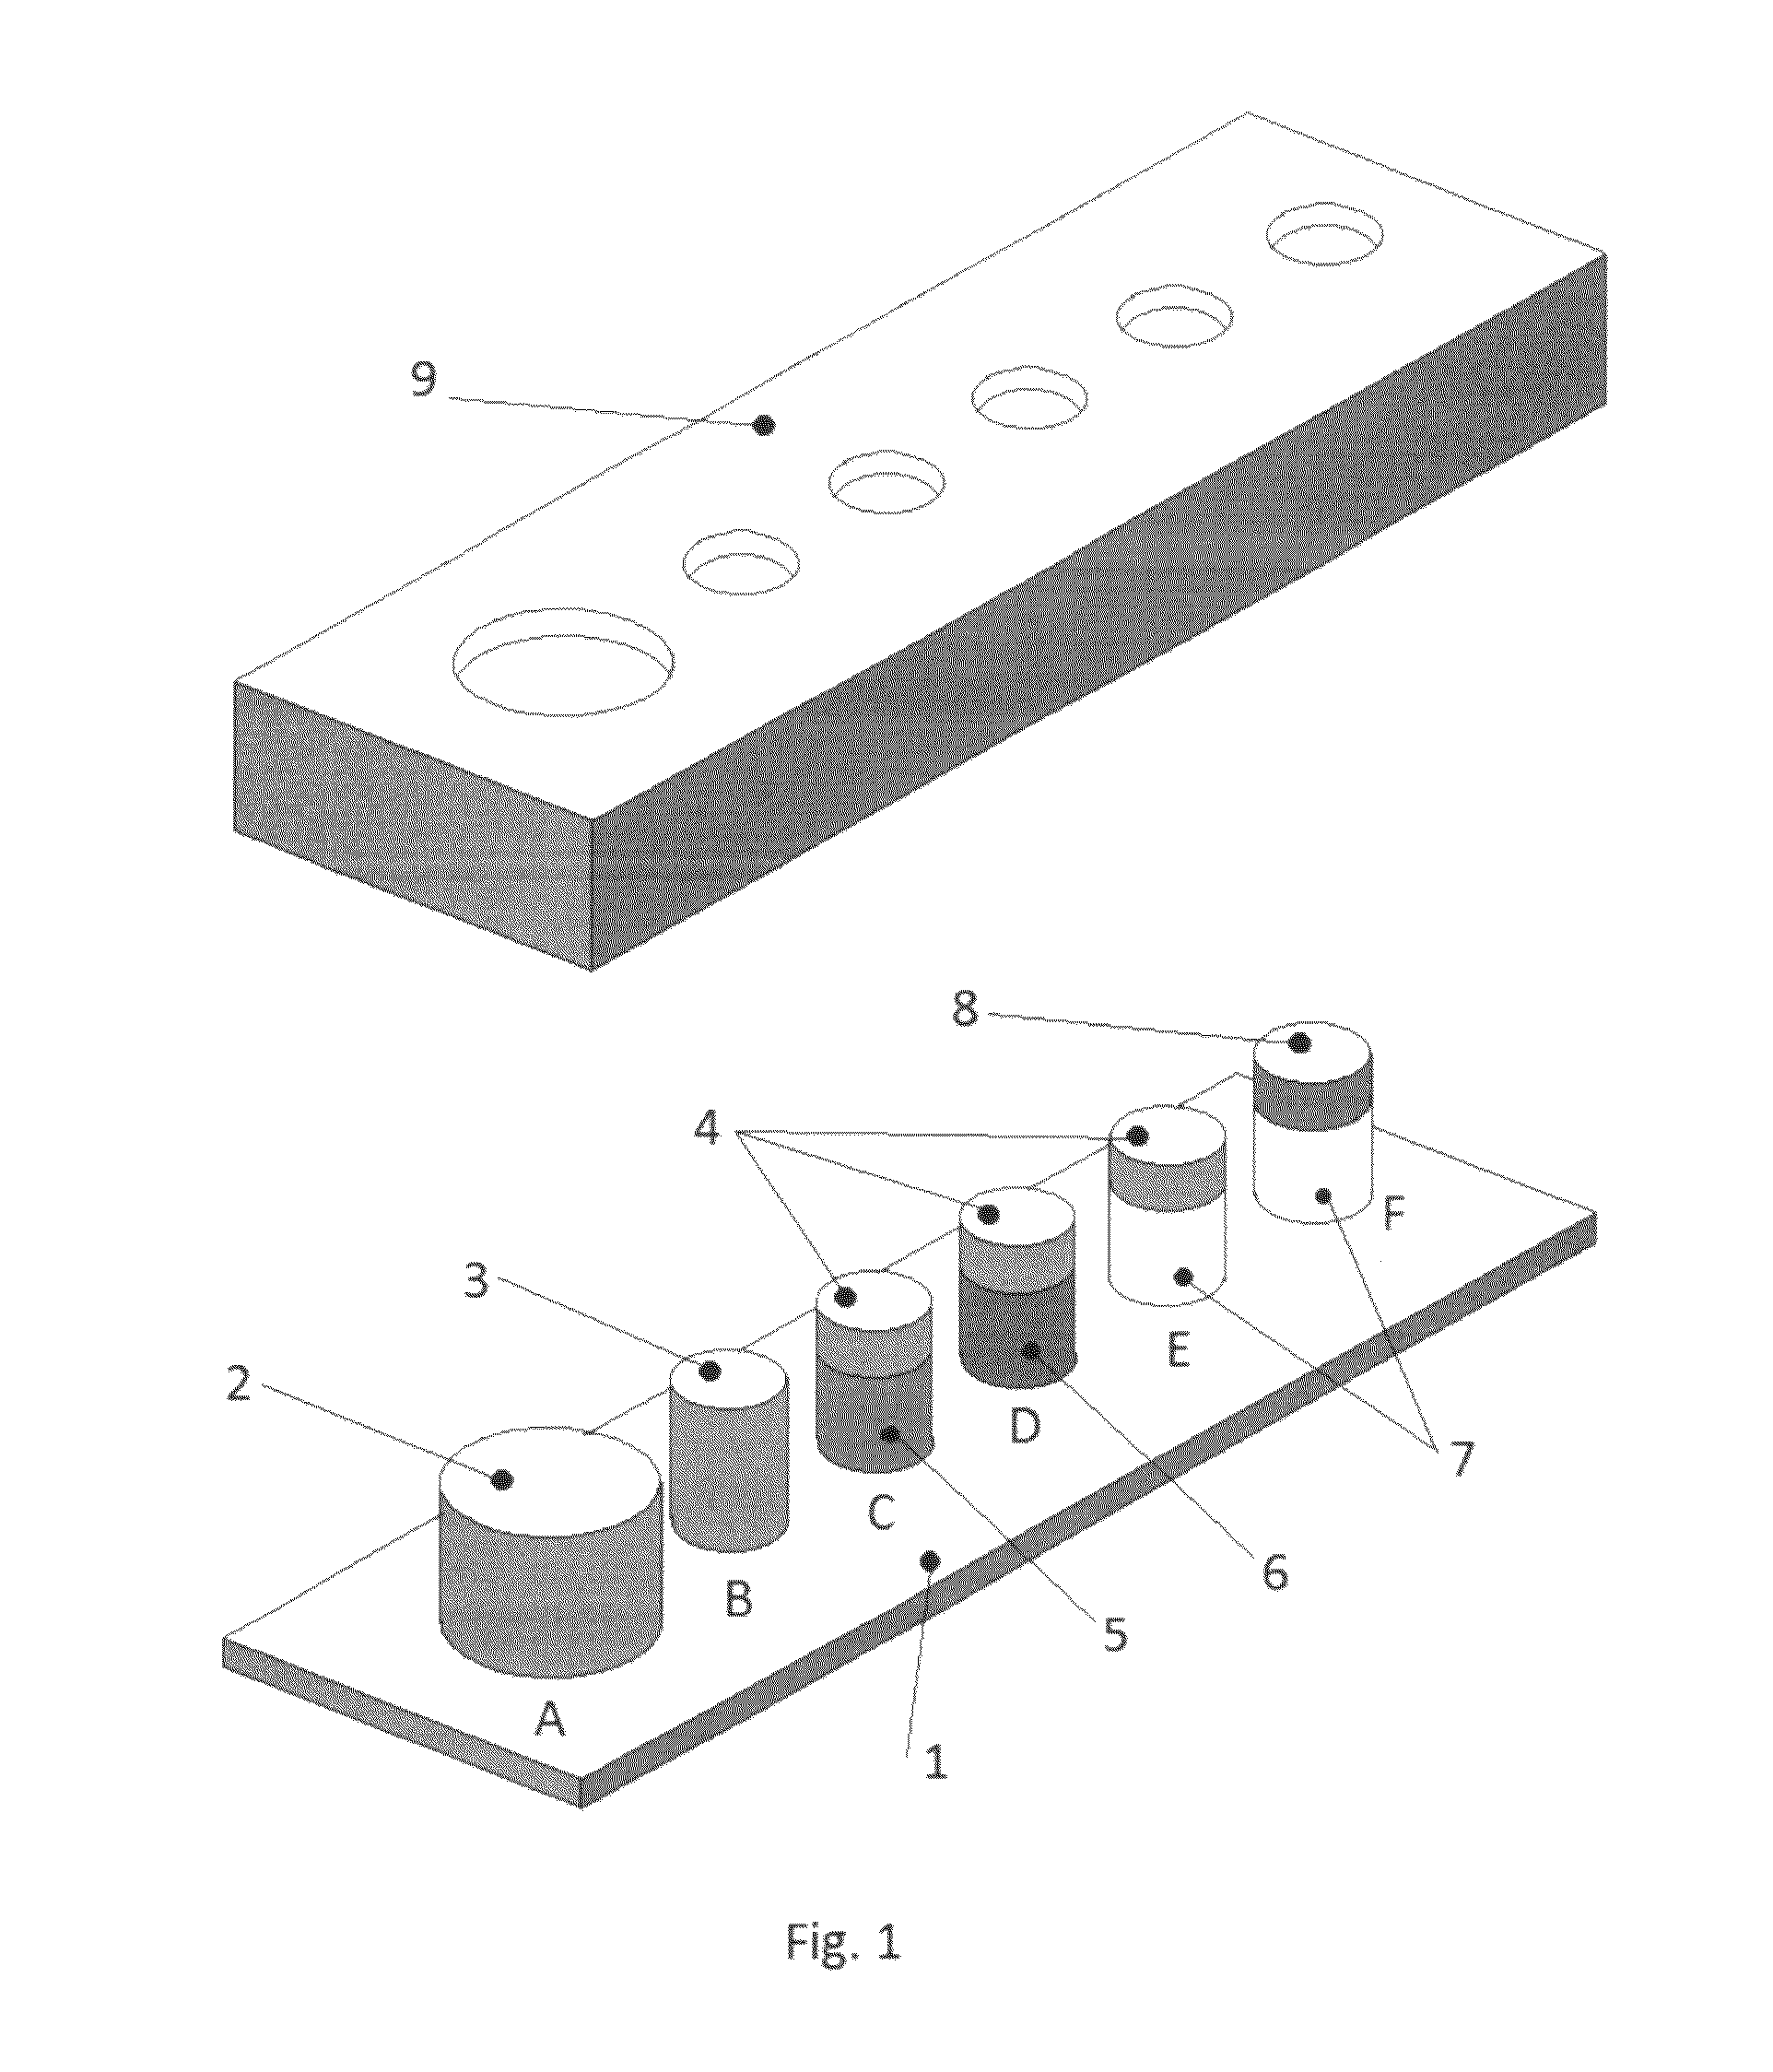 Apparatus for simulating thermal conductivity and electrical resistance of diamonds and their substitutes